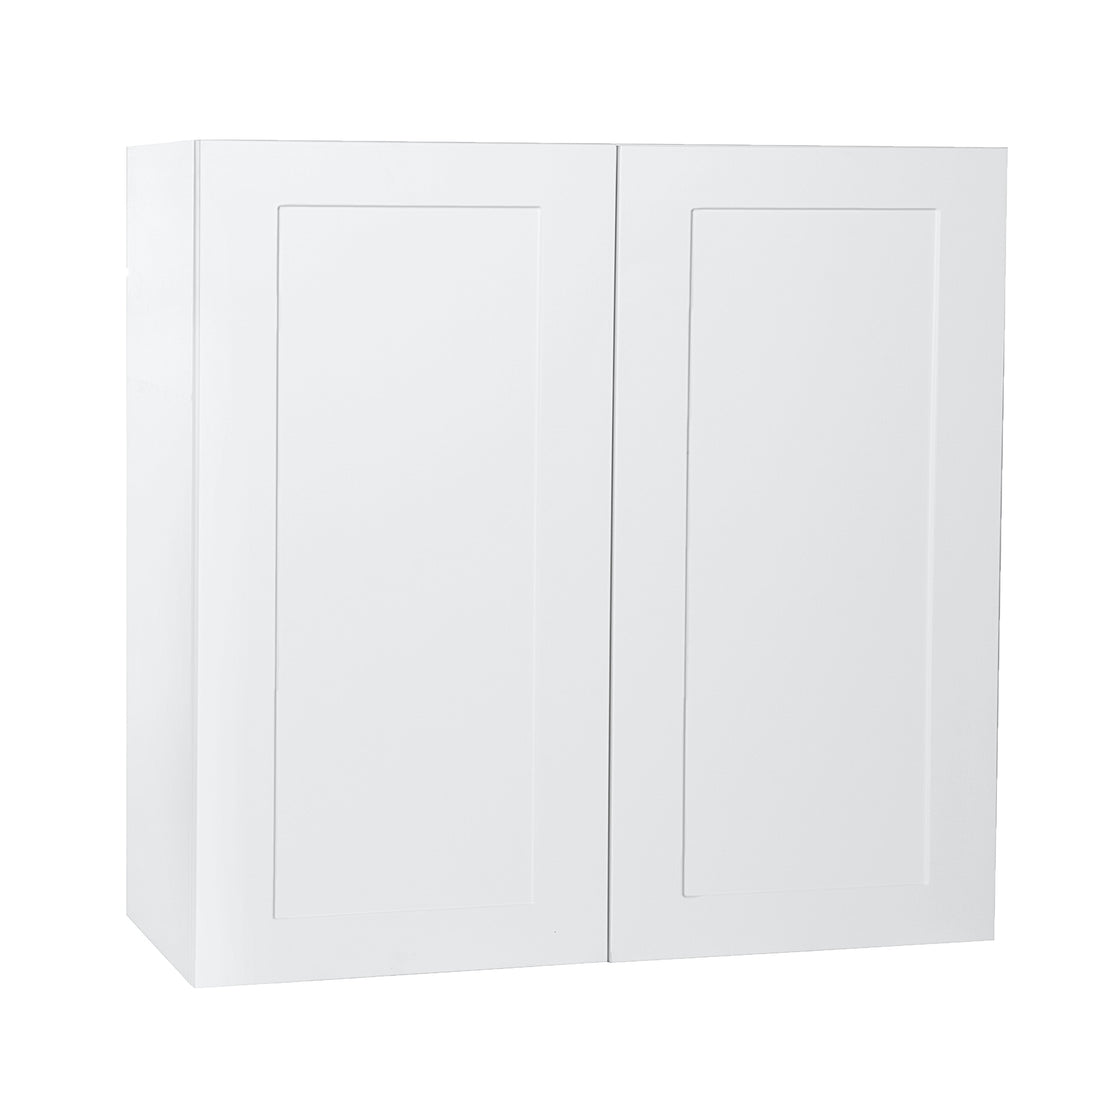 Quick Assemble Modern Style with Soft Close, White Shaker Wall Kitchen Cabinet, 2 Door (36 in W x 12 D x 36 in H) -  Pro-Edge HD